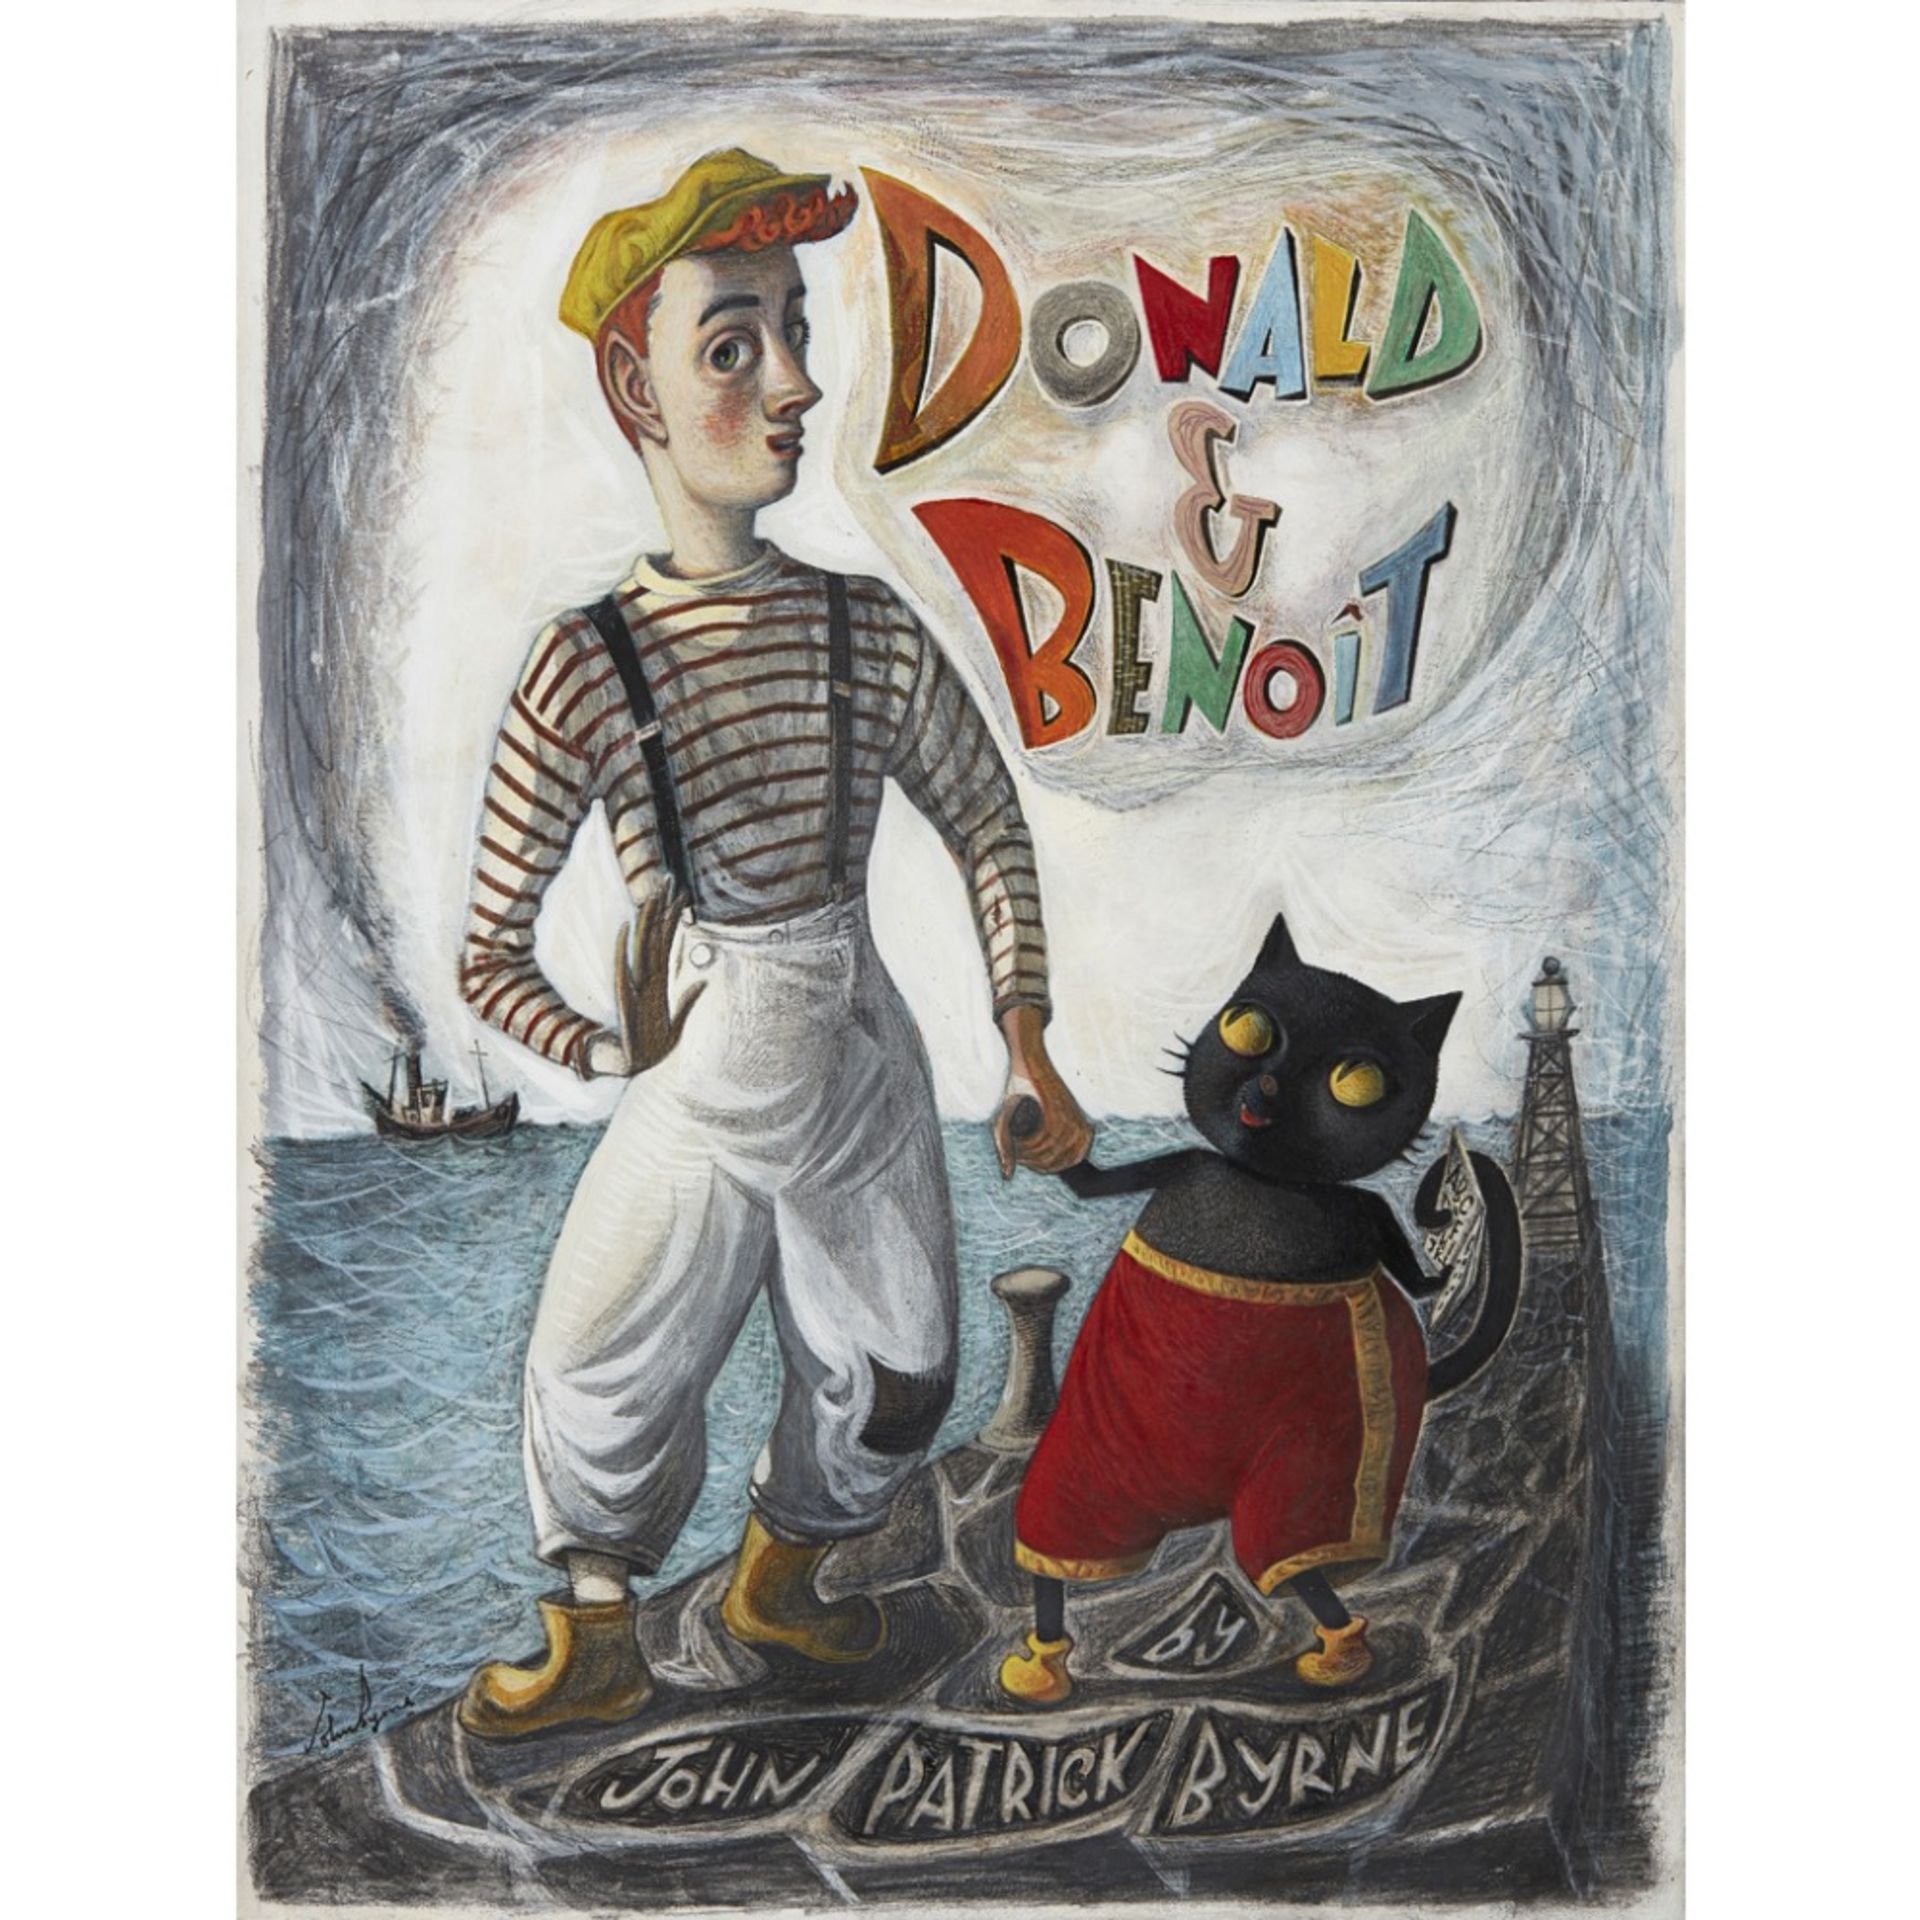 [§] JOHN BYRNE (SCOTTISH B.1940)DONALD AND BENOIT (FRONT COVER) - 2010 Signed, pencil and